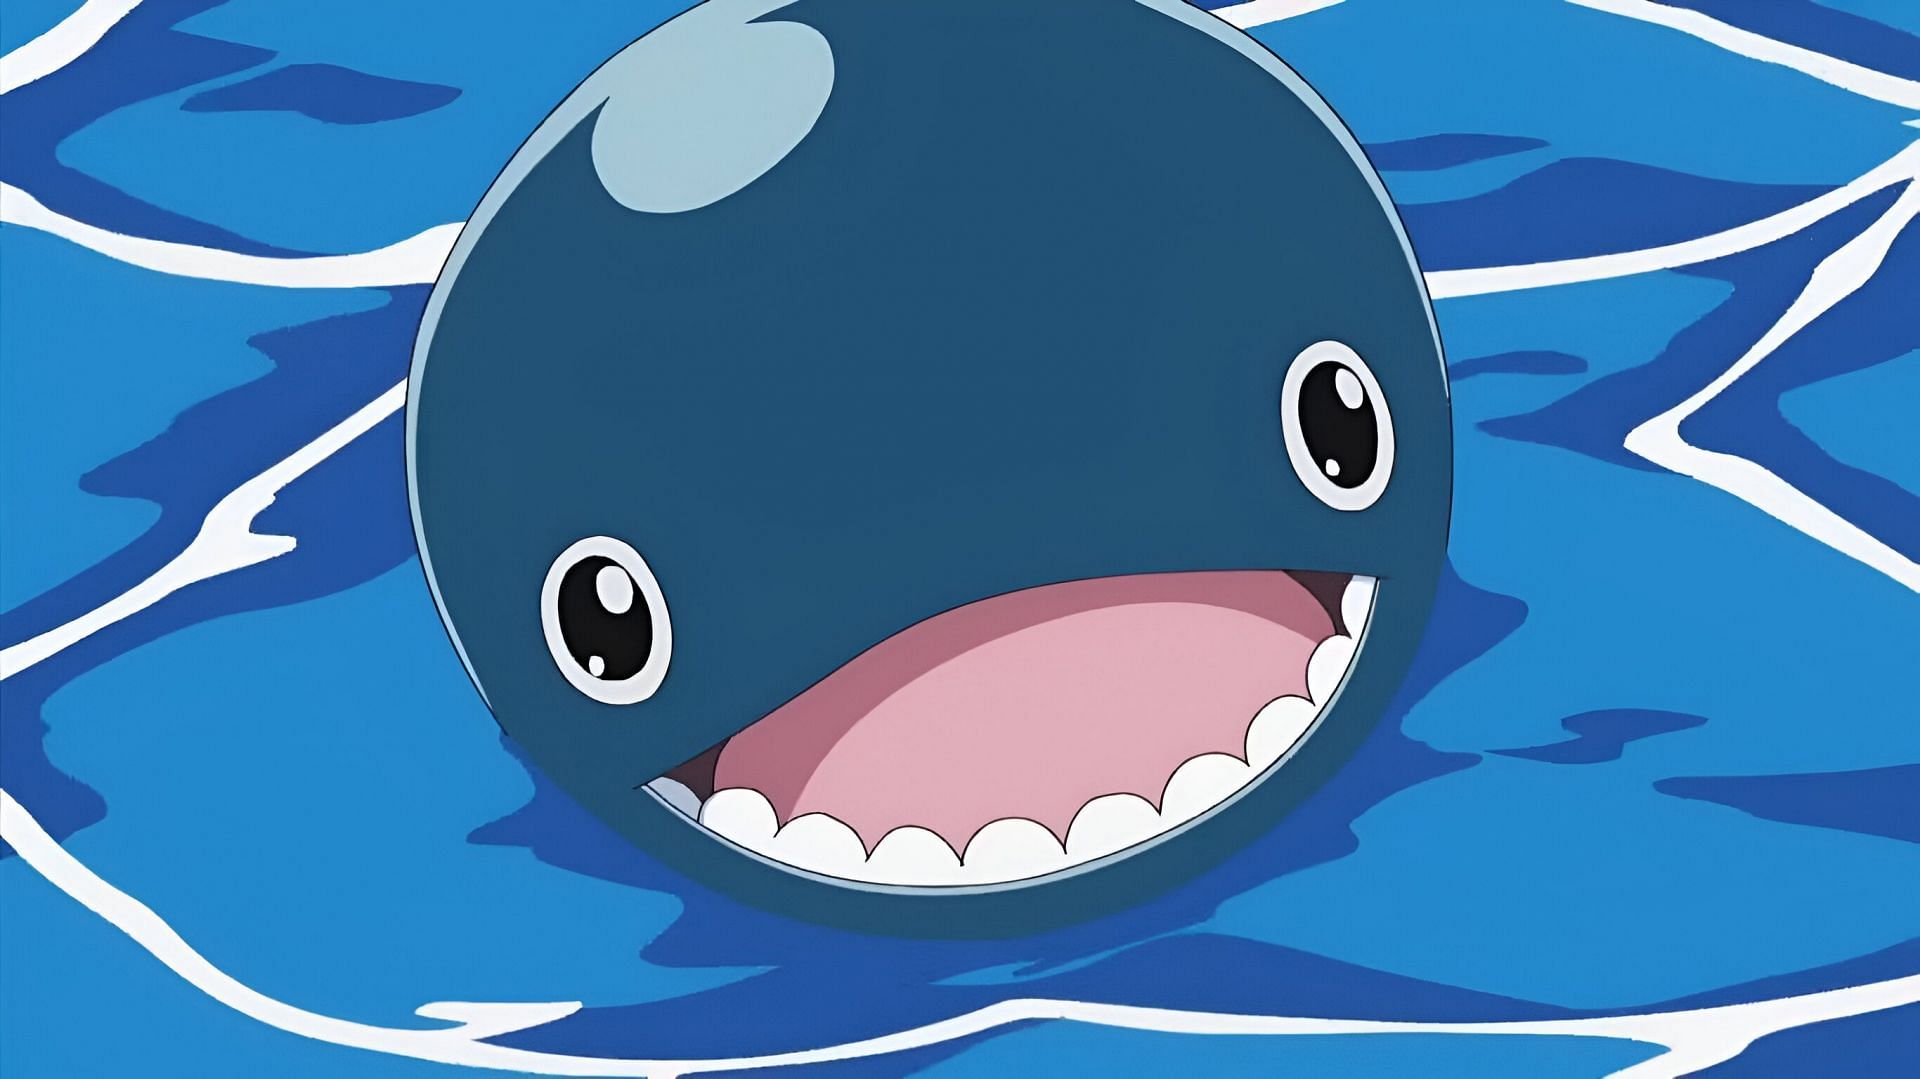 Laboon as seen in the anime (Image via Toei Animation)